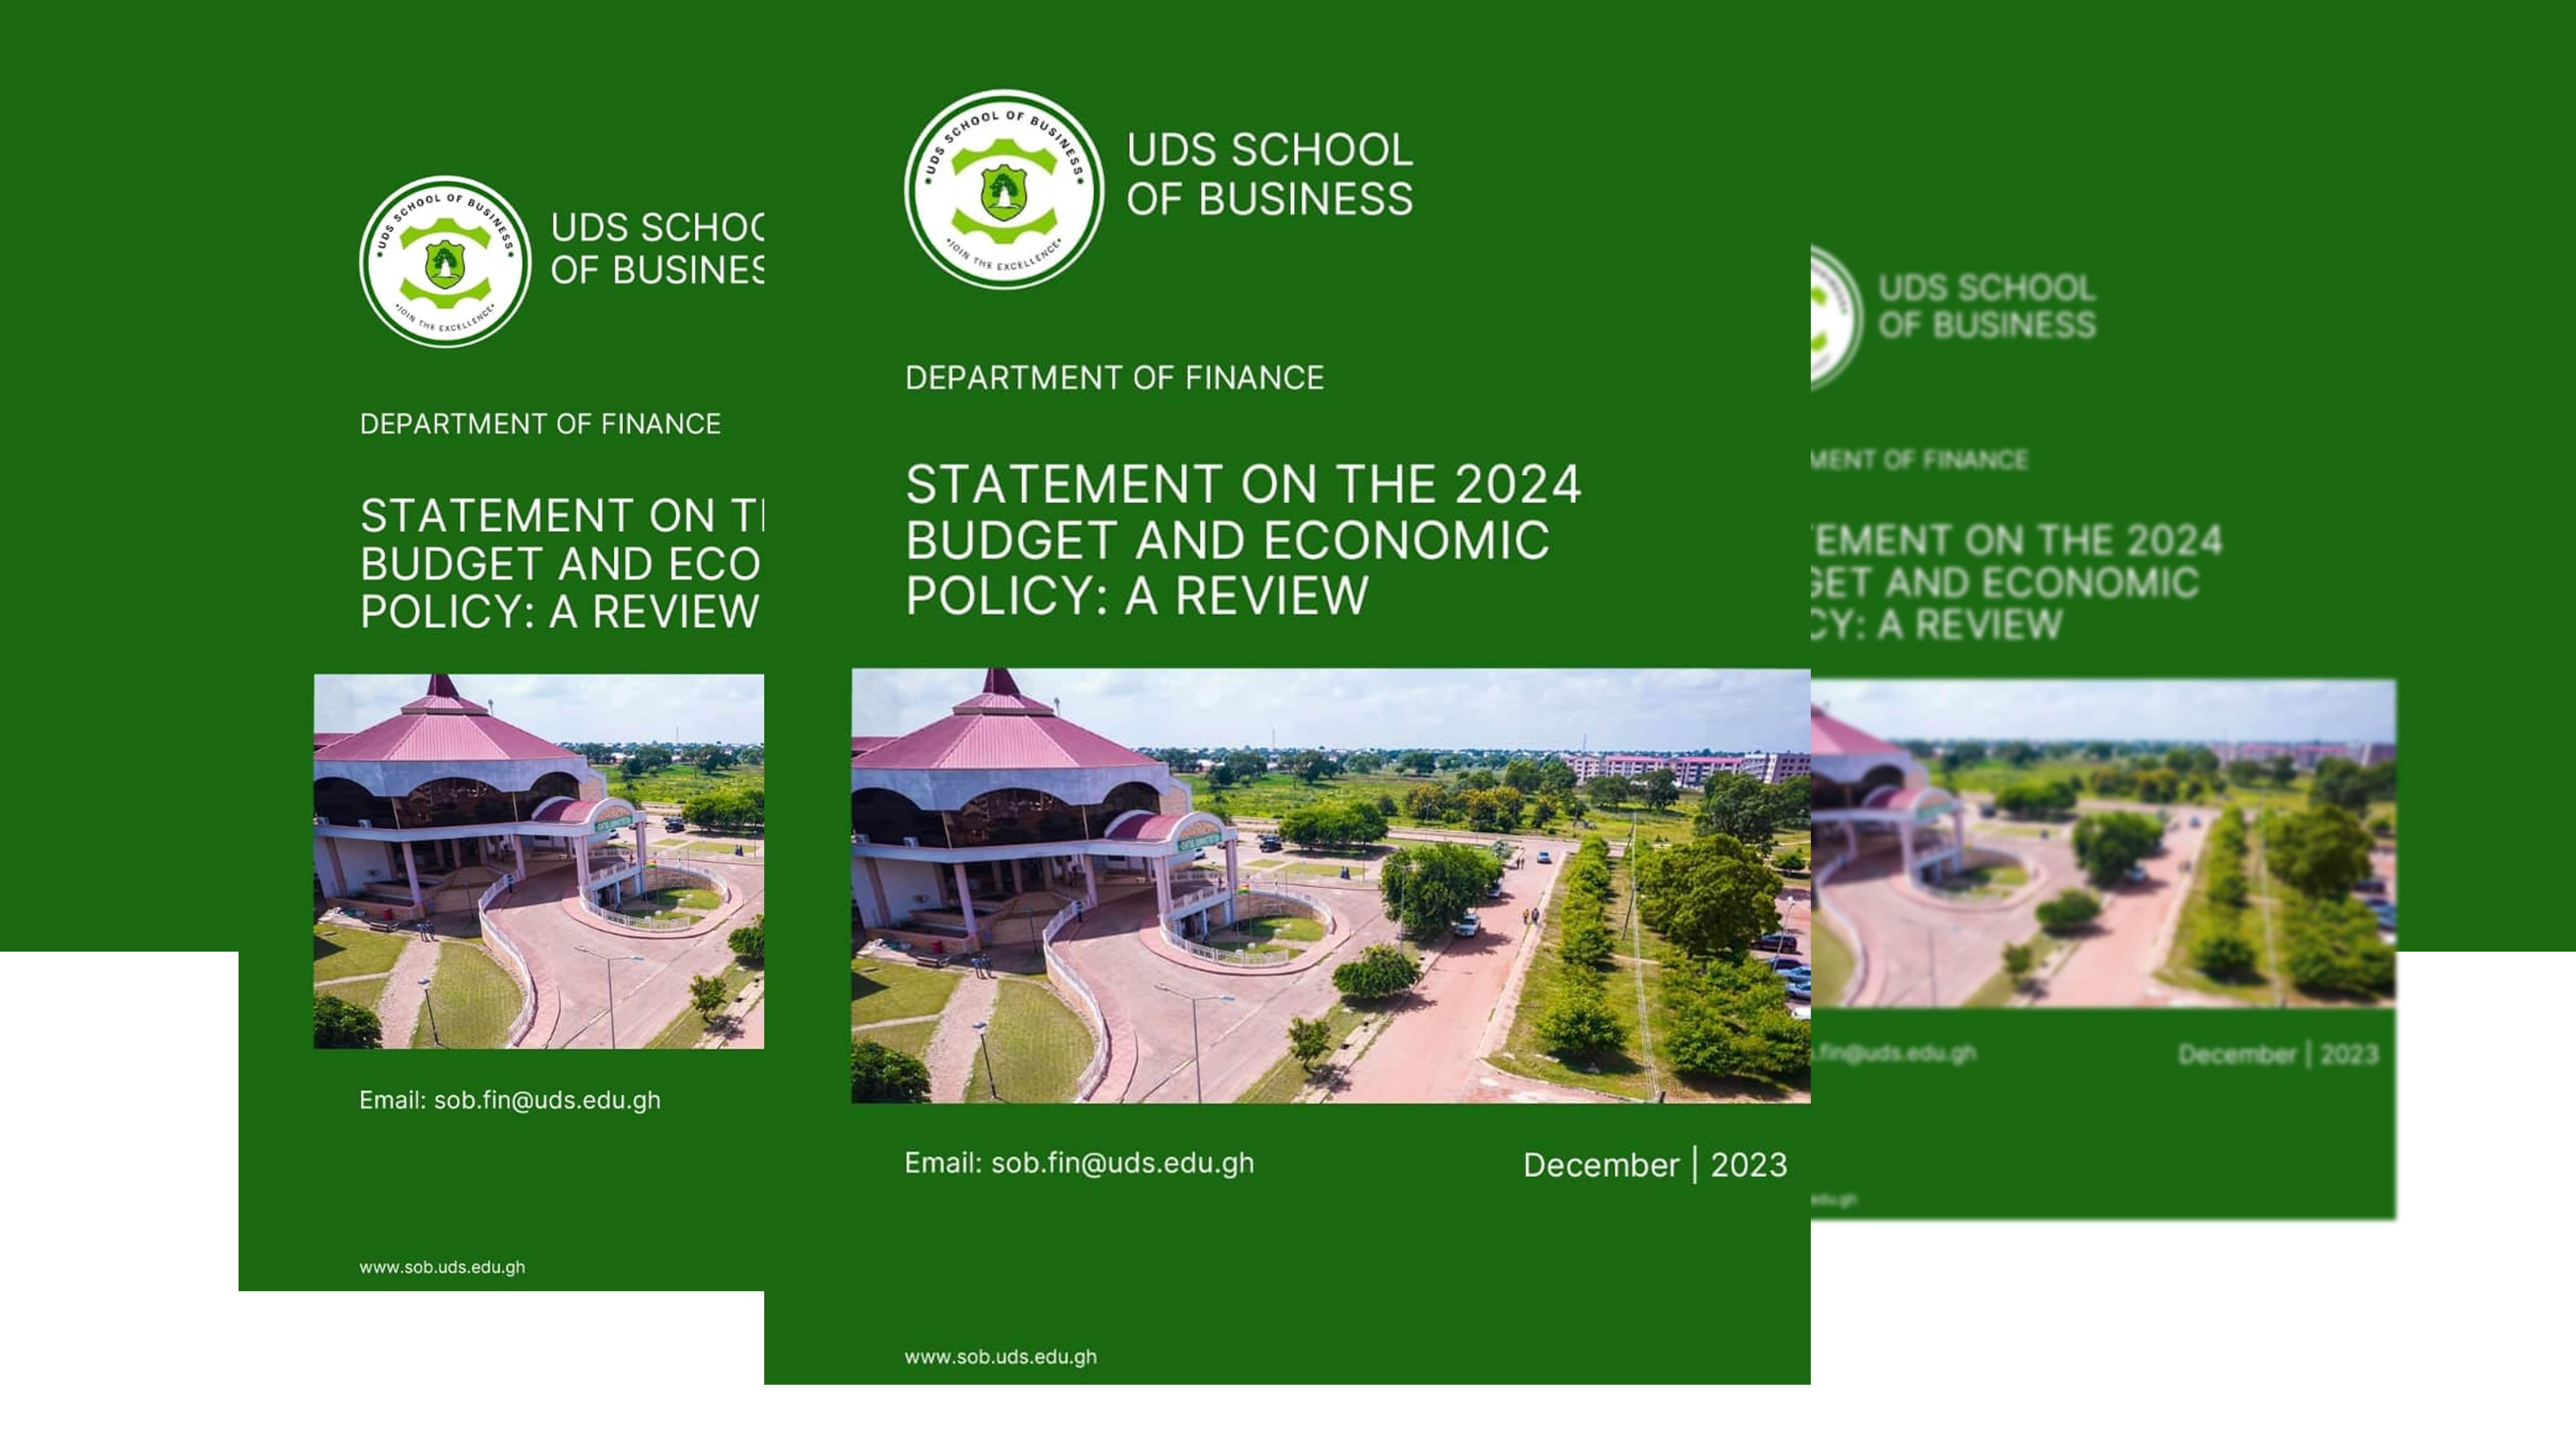 UDS School Of Business Releases Statement Reviewing The 2024 Budget And